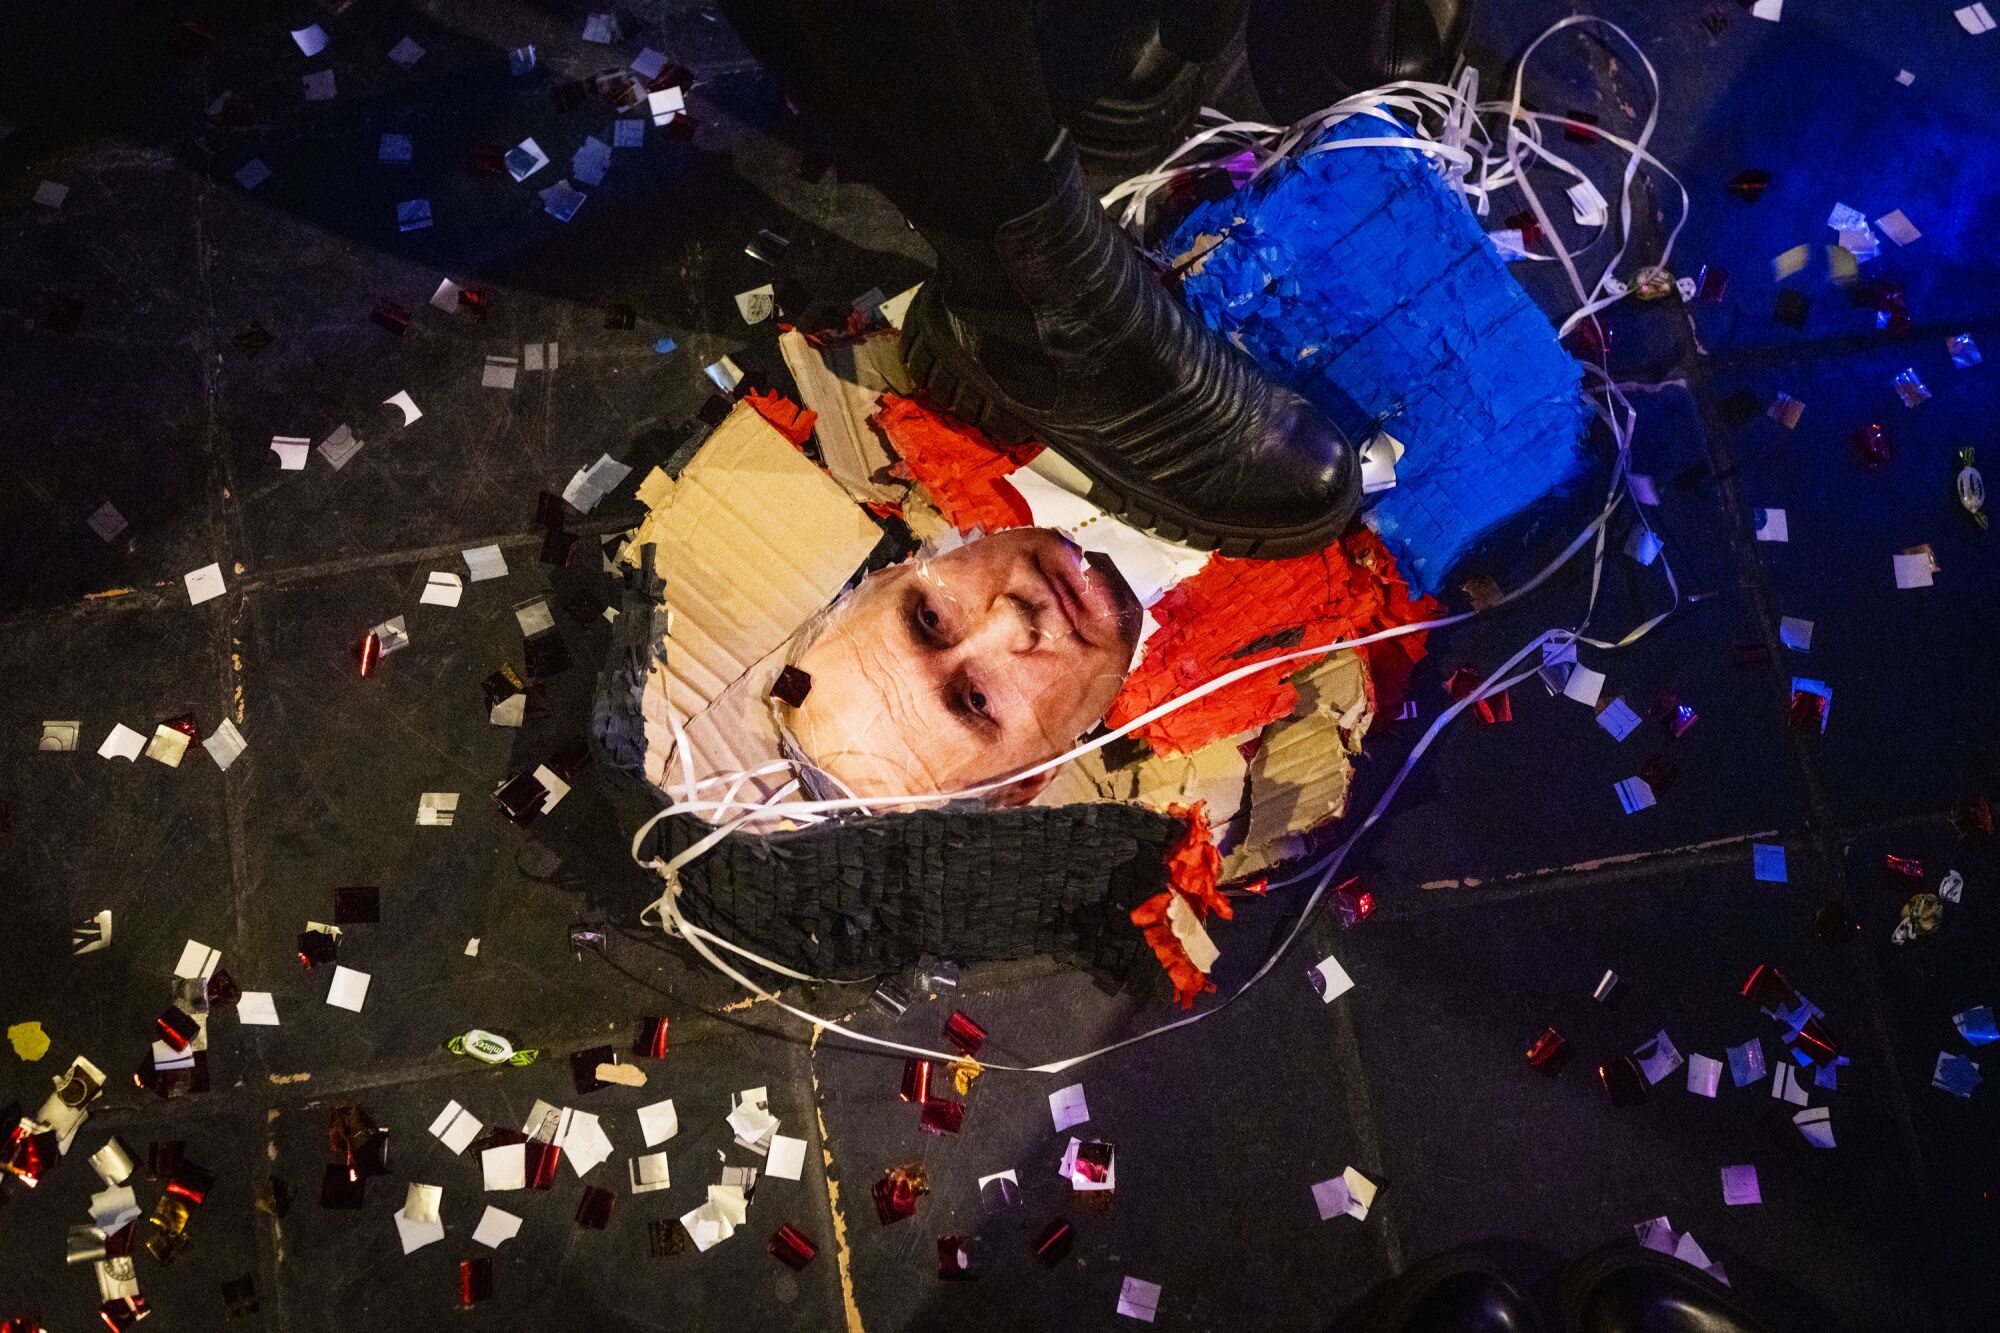 A smashed piñata featuring the face of Vladimir Putin on the floor of a bar 